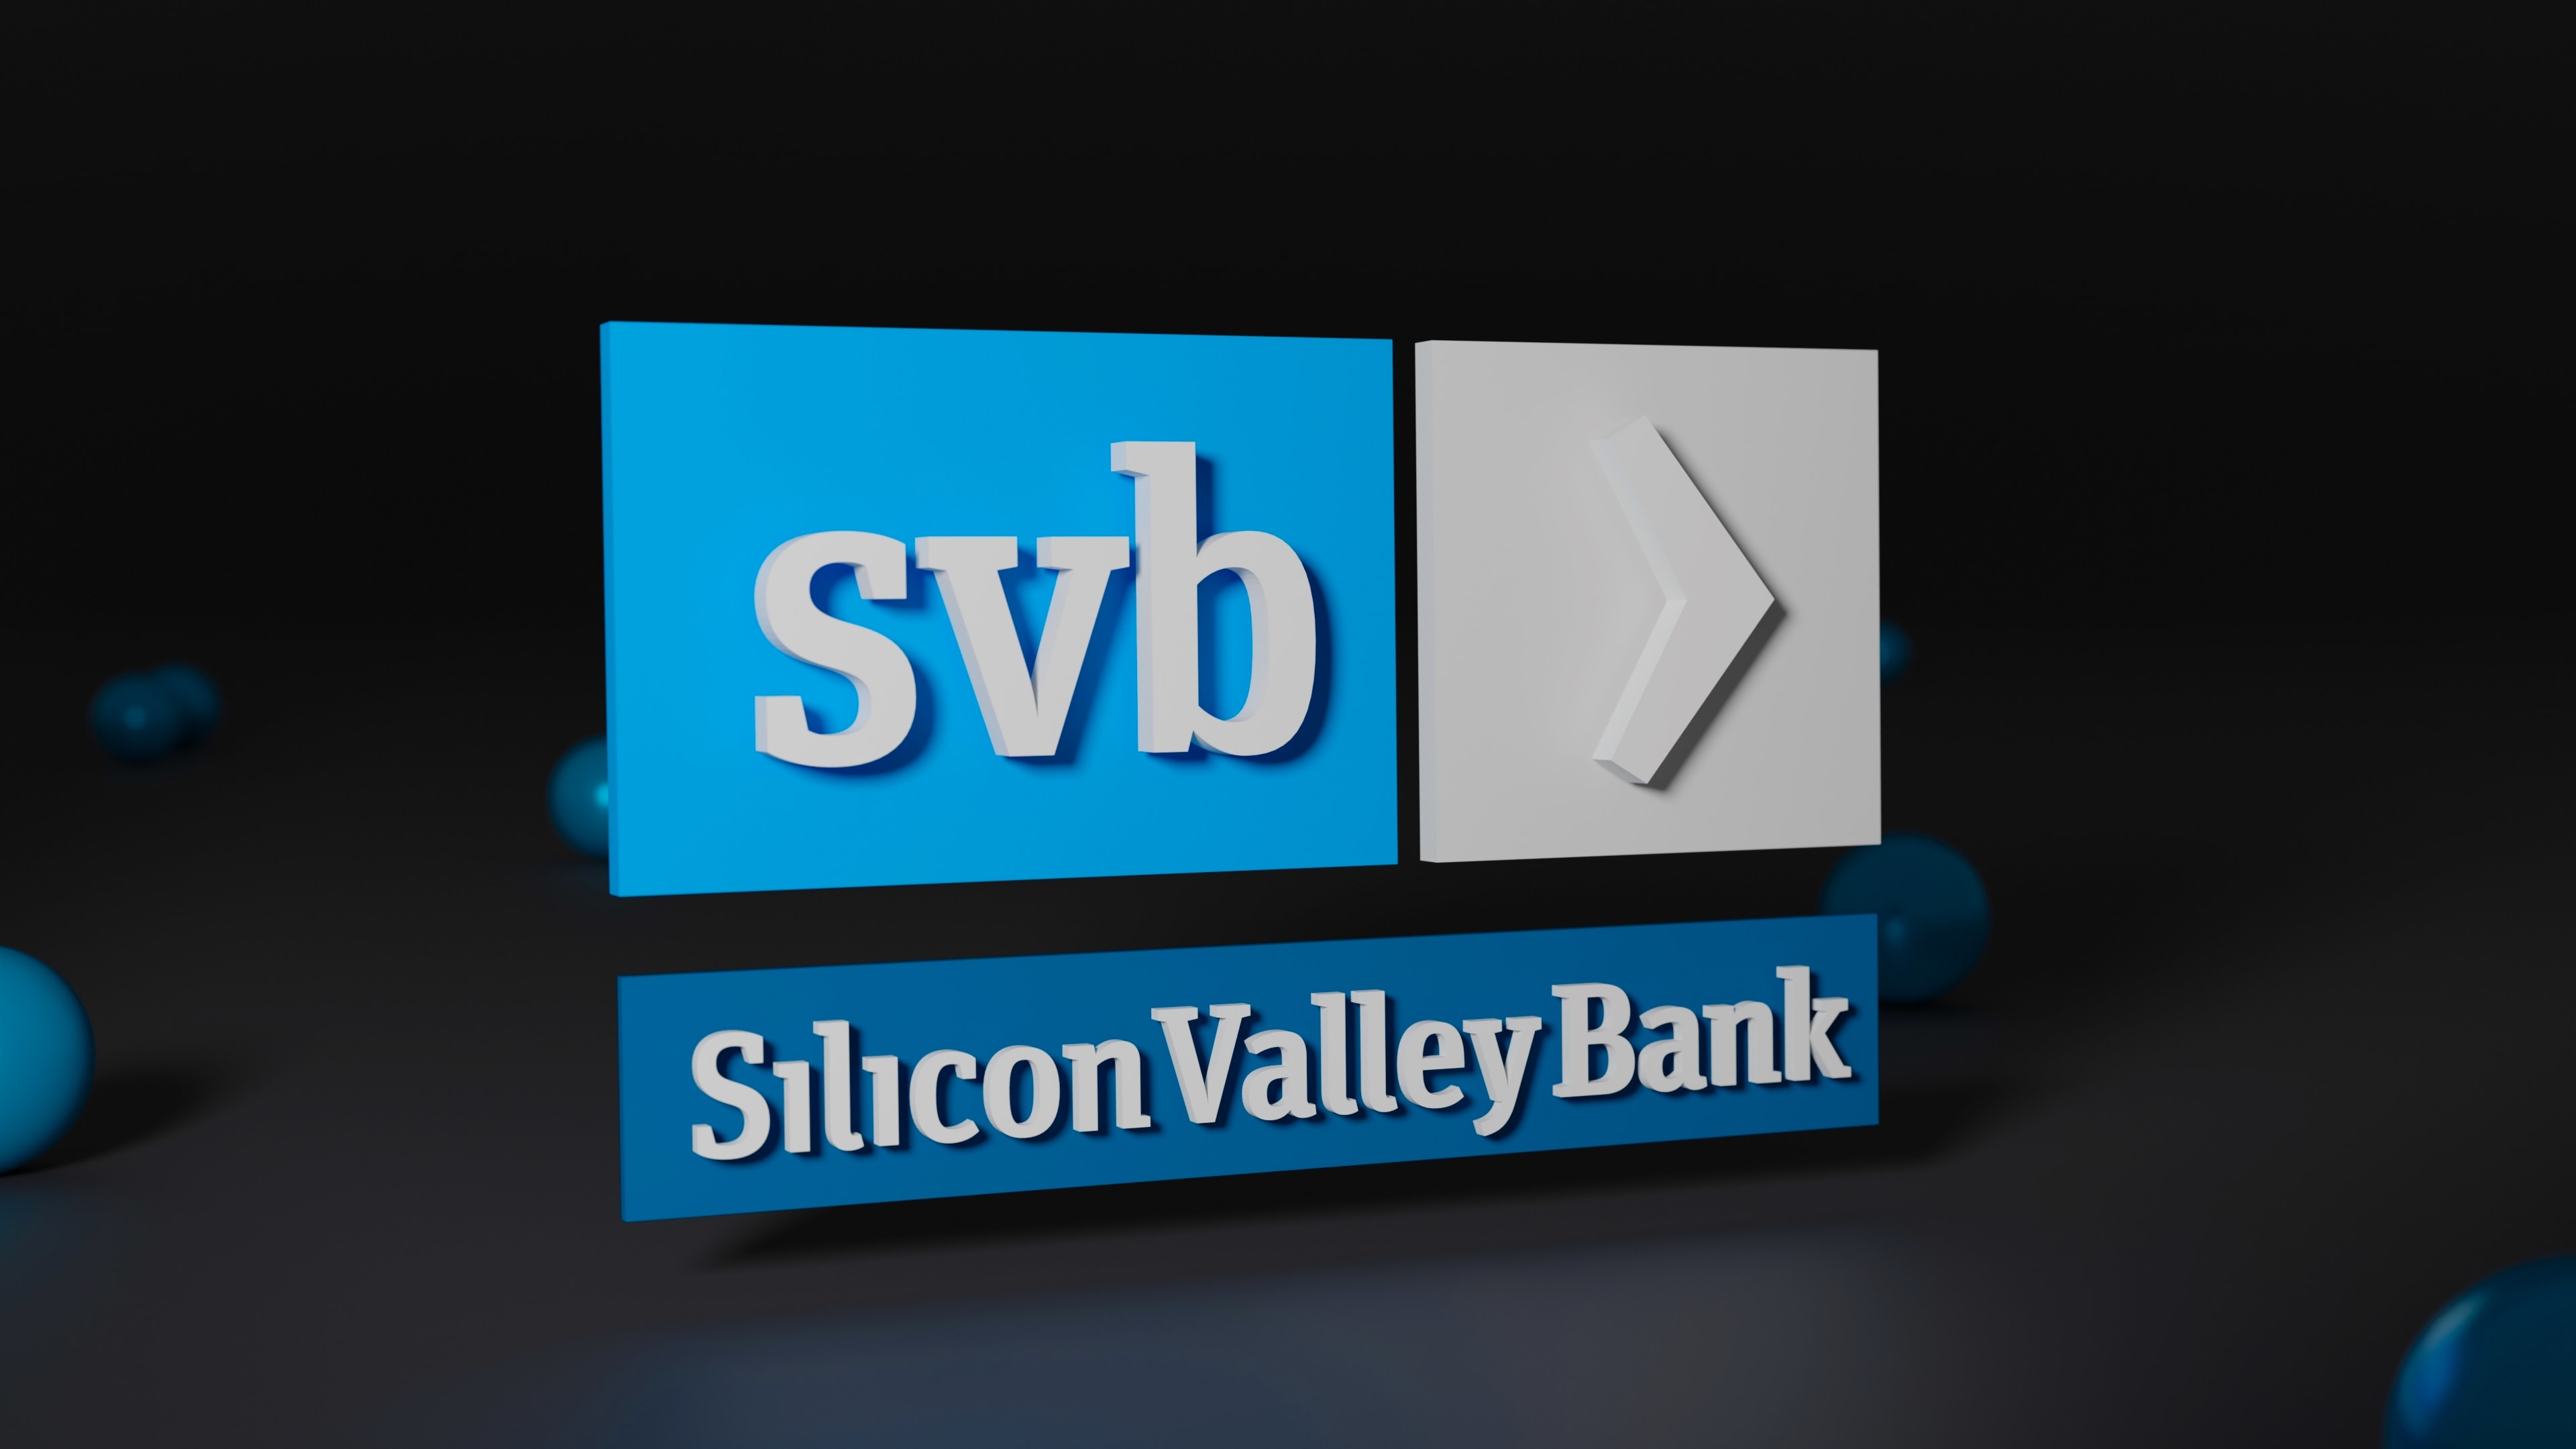 On 10 March 2023, Silicon Valley Bank failed (image: Unplash).